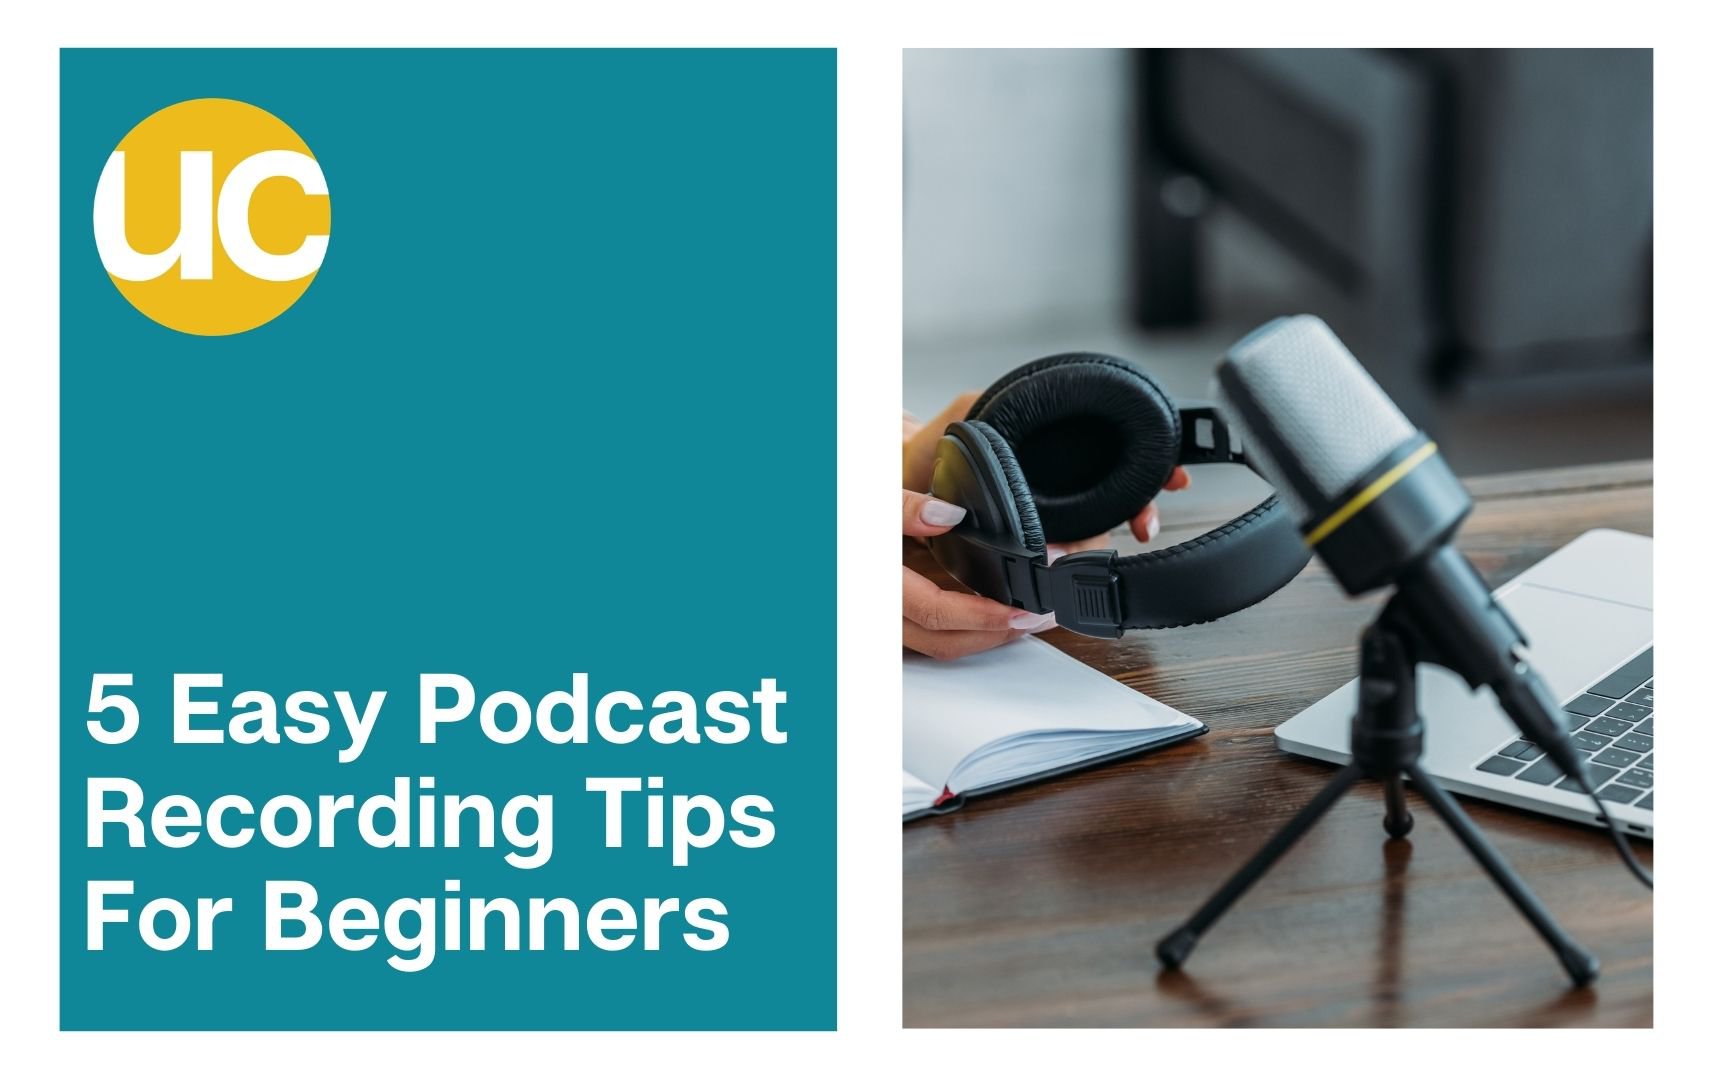 5 Easy Podcast Recording Tips For Beginners